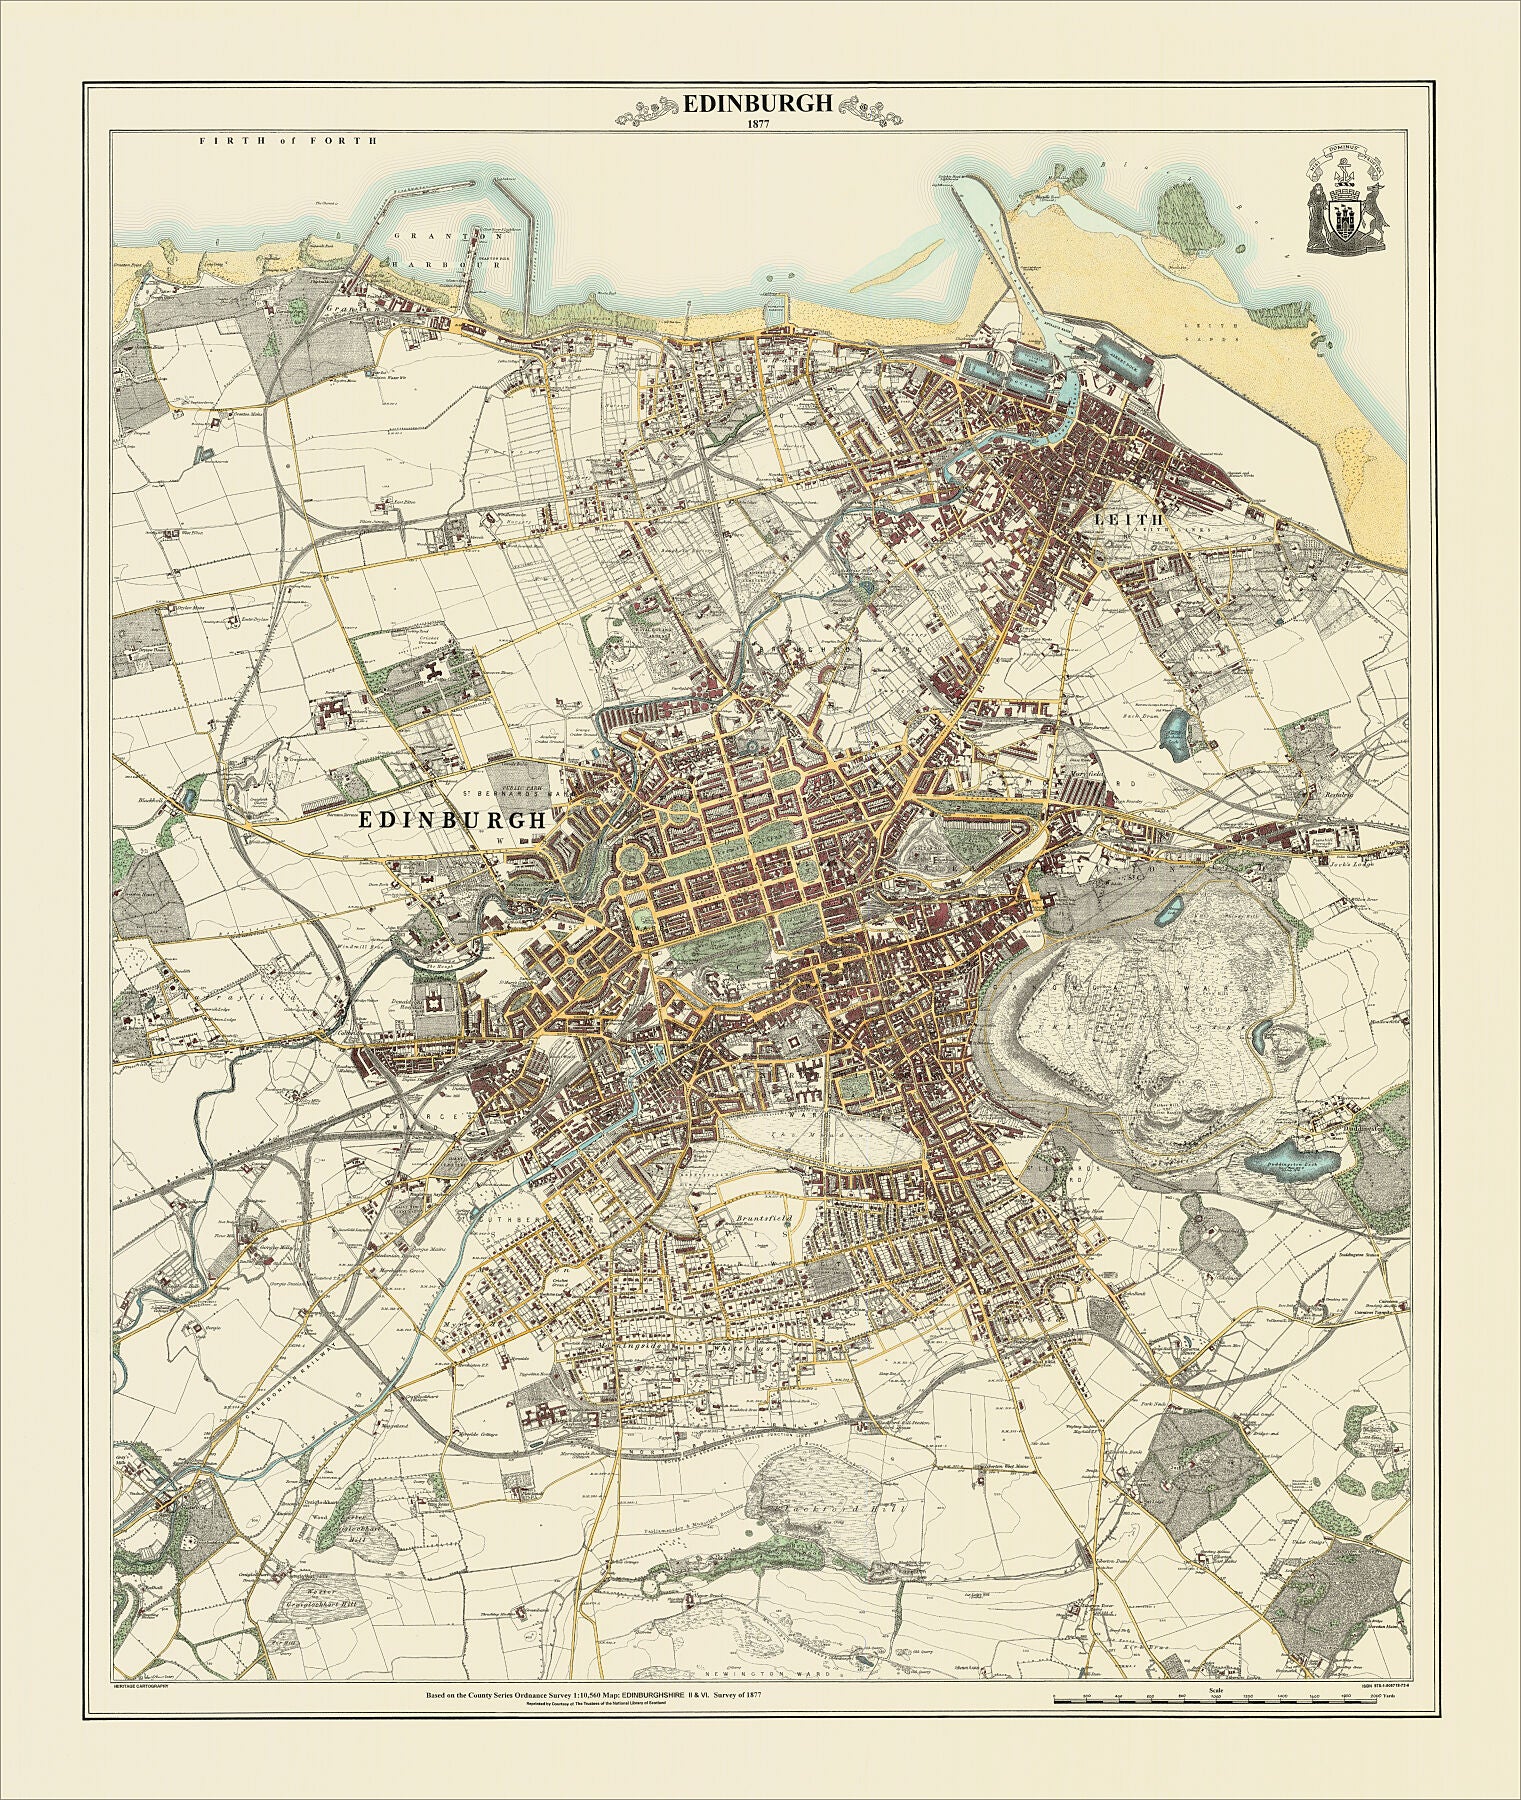 Coloured Victorian map of Edinburgh in 1877 by Peter J Adams of Heritage Cartography